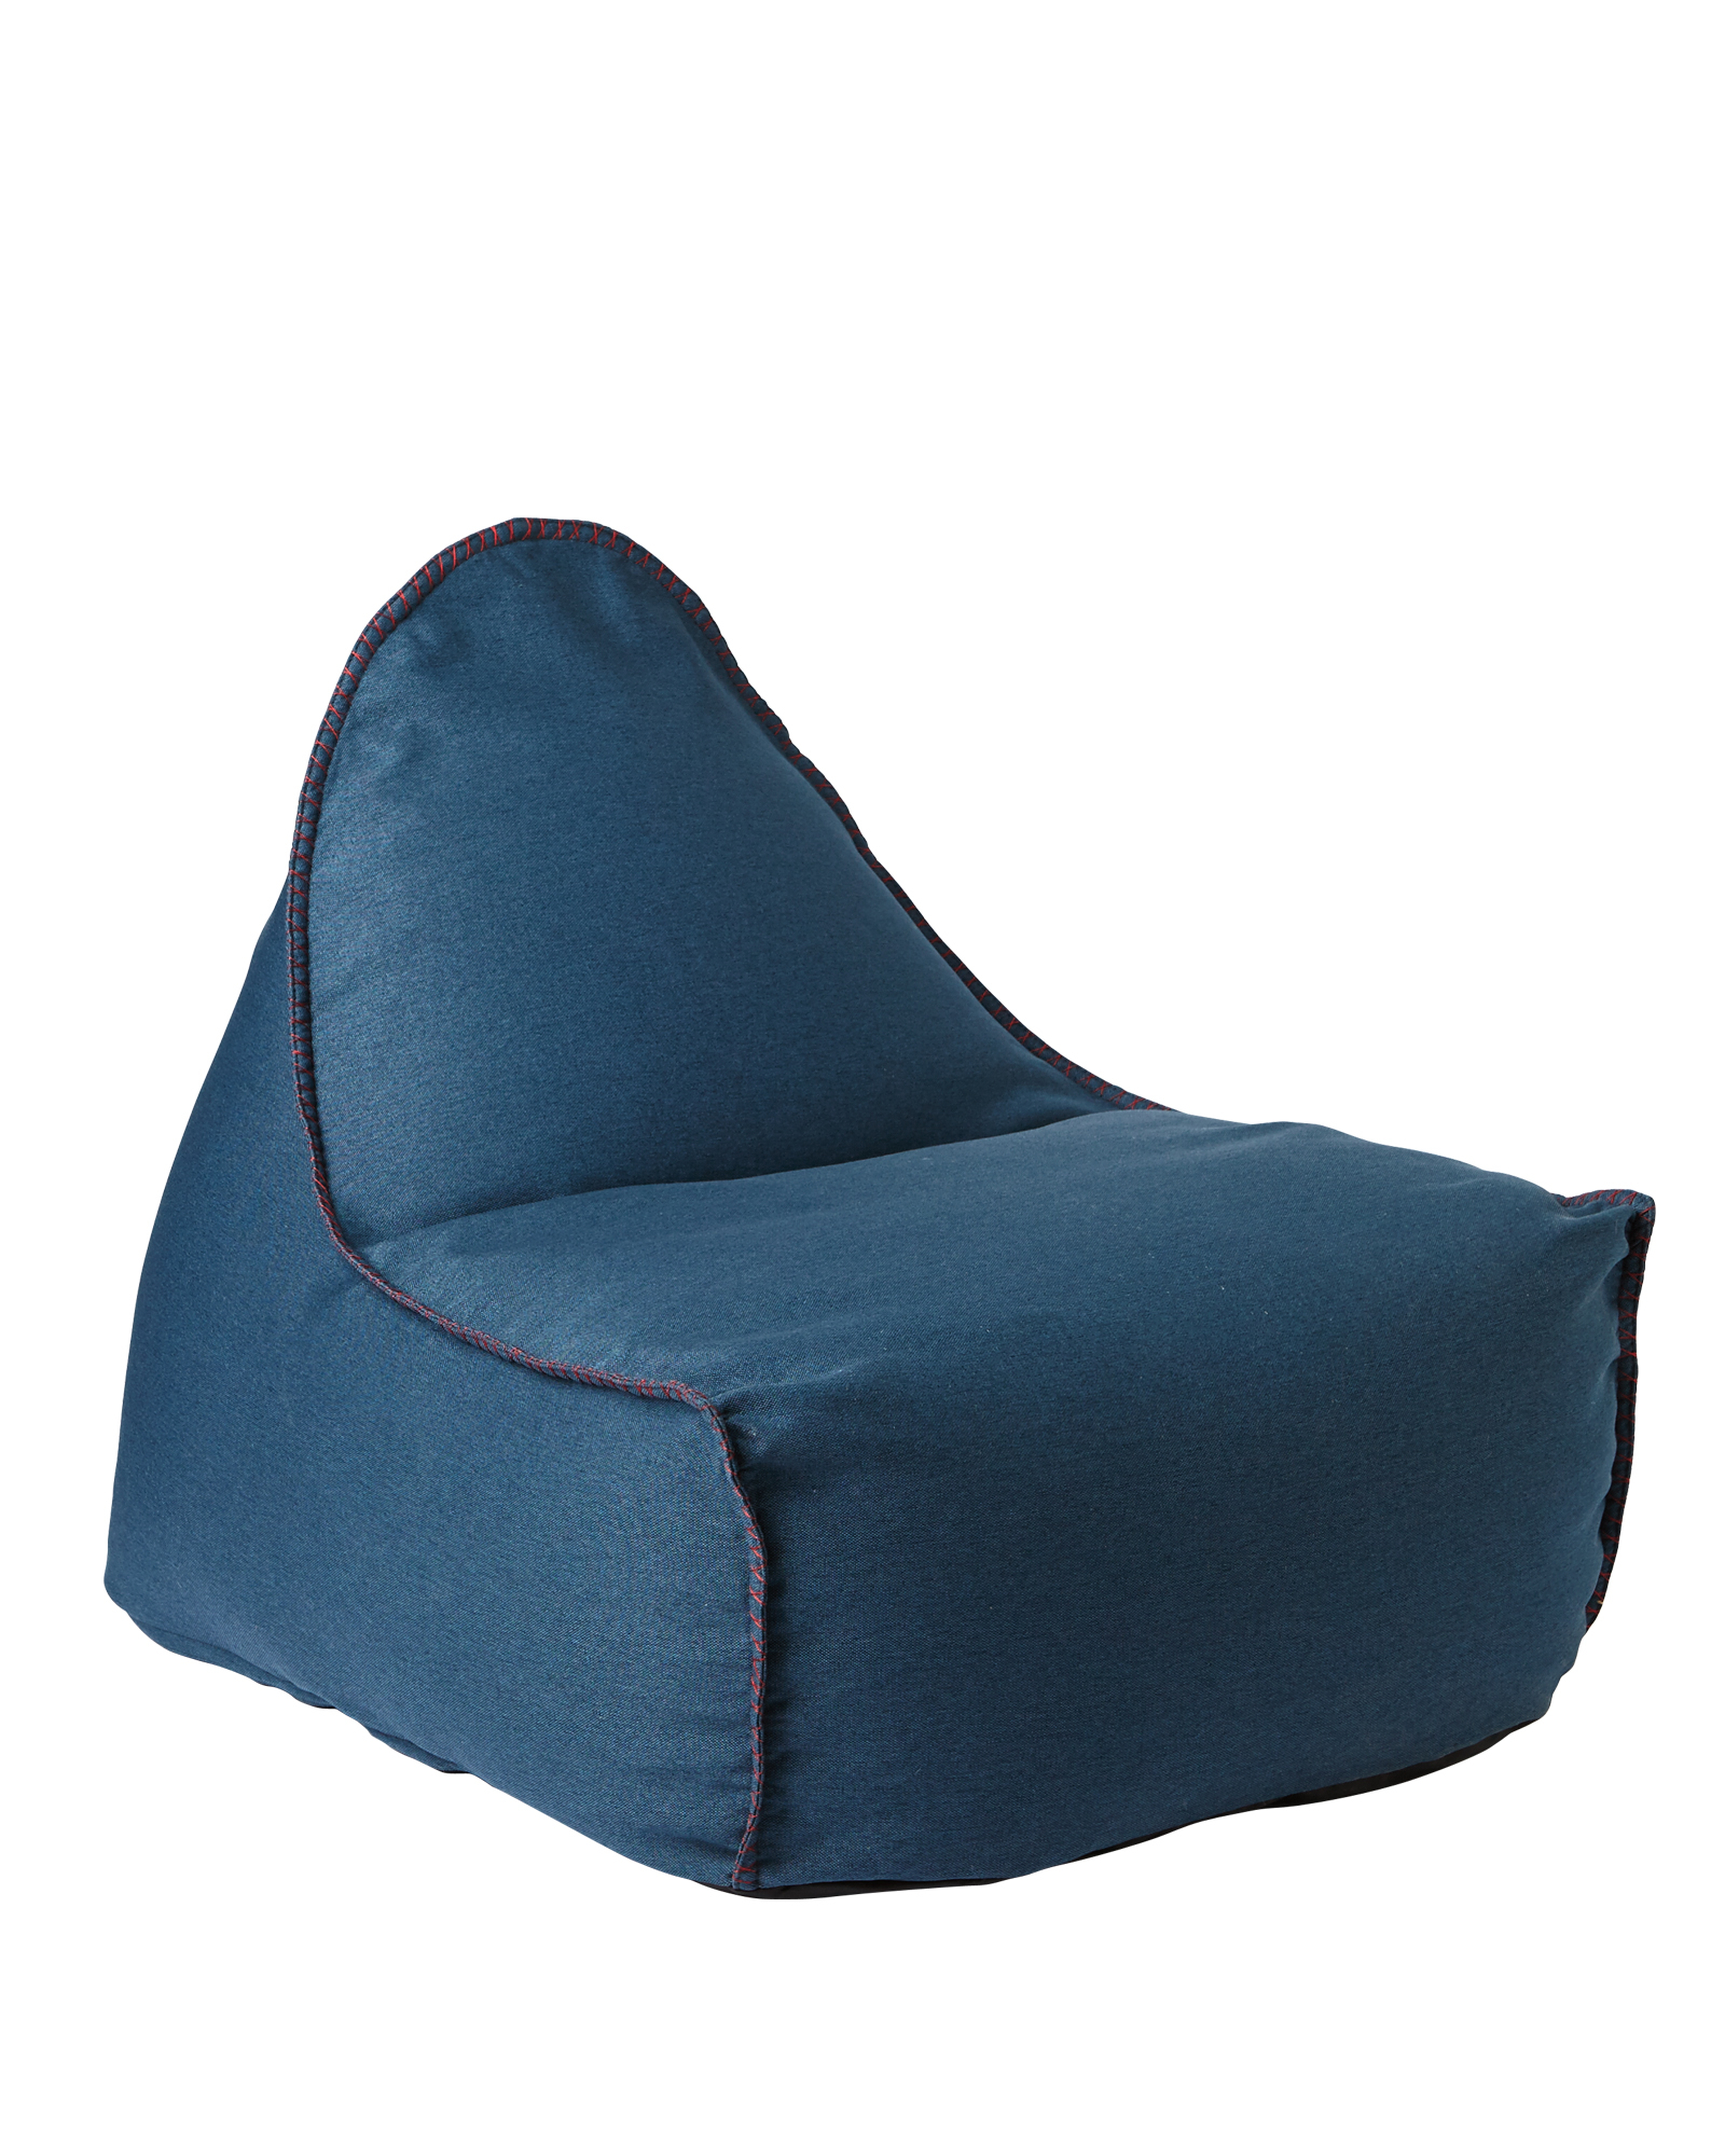 Newport Lounger - Midnight Blue - Serena and Lily